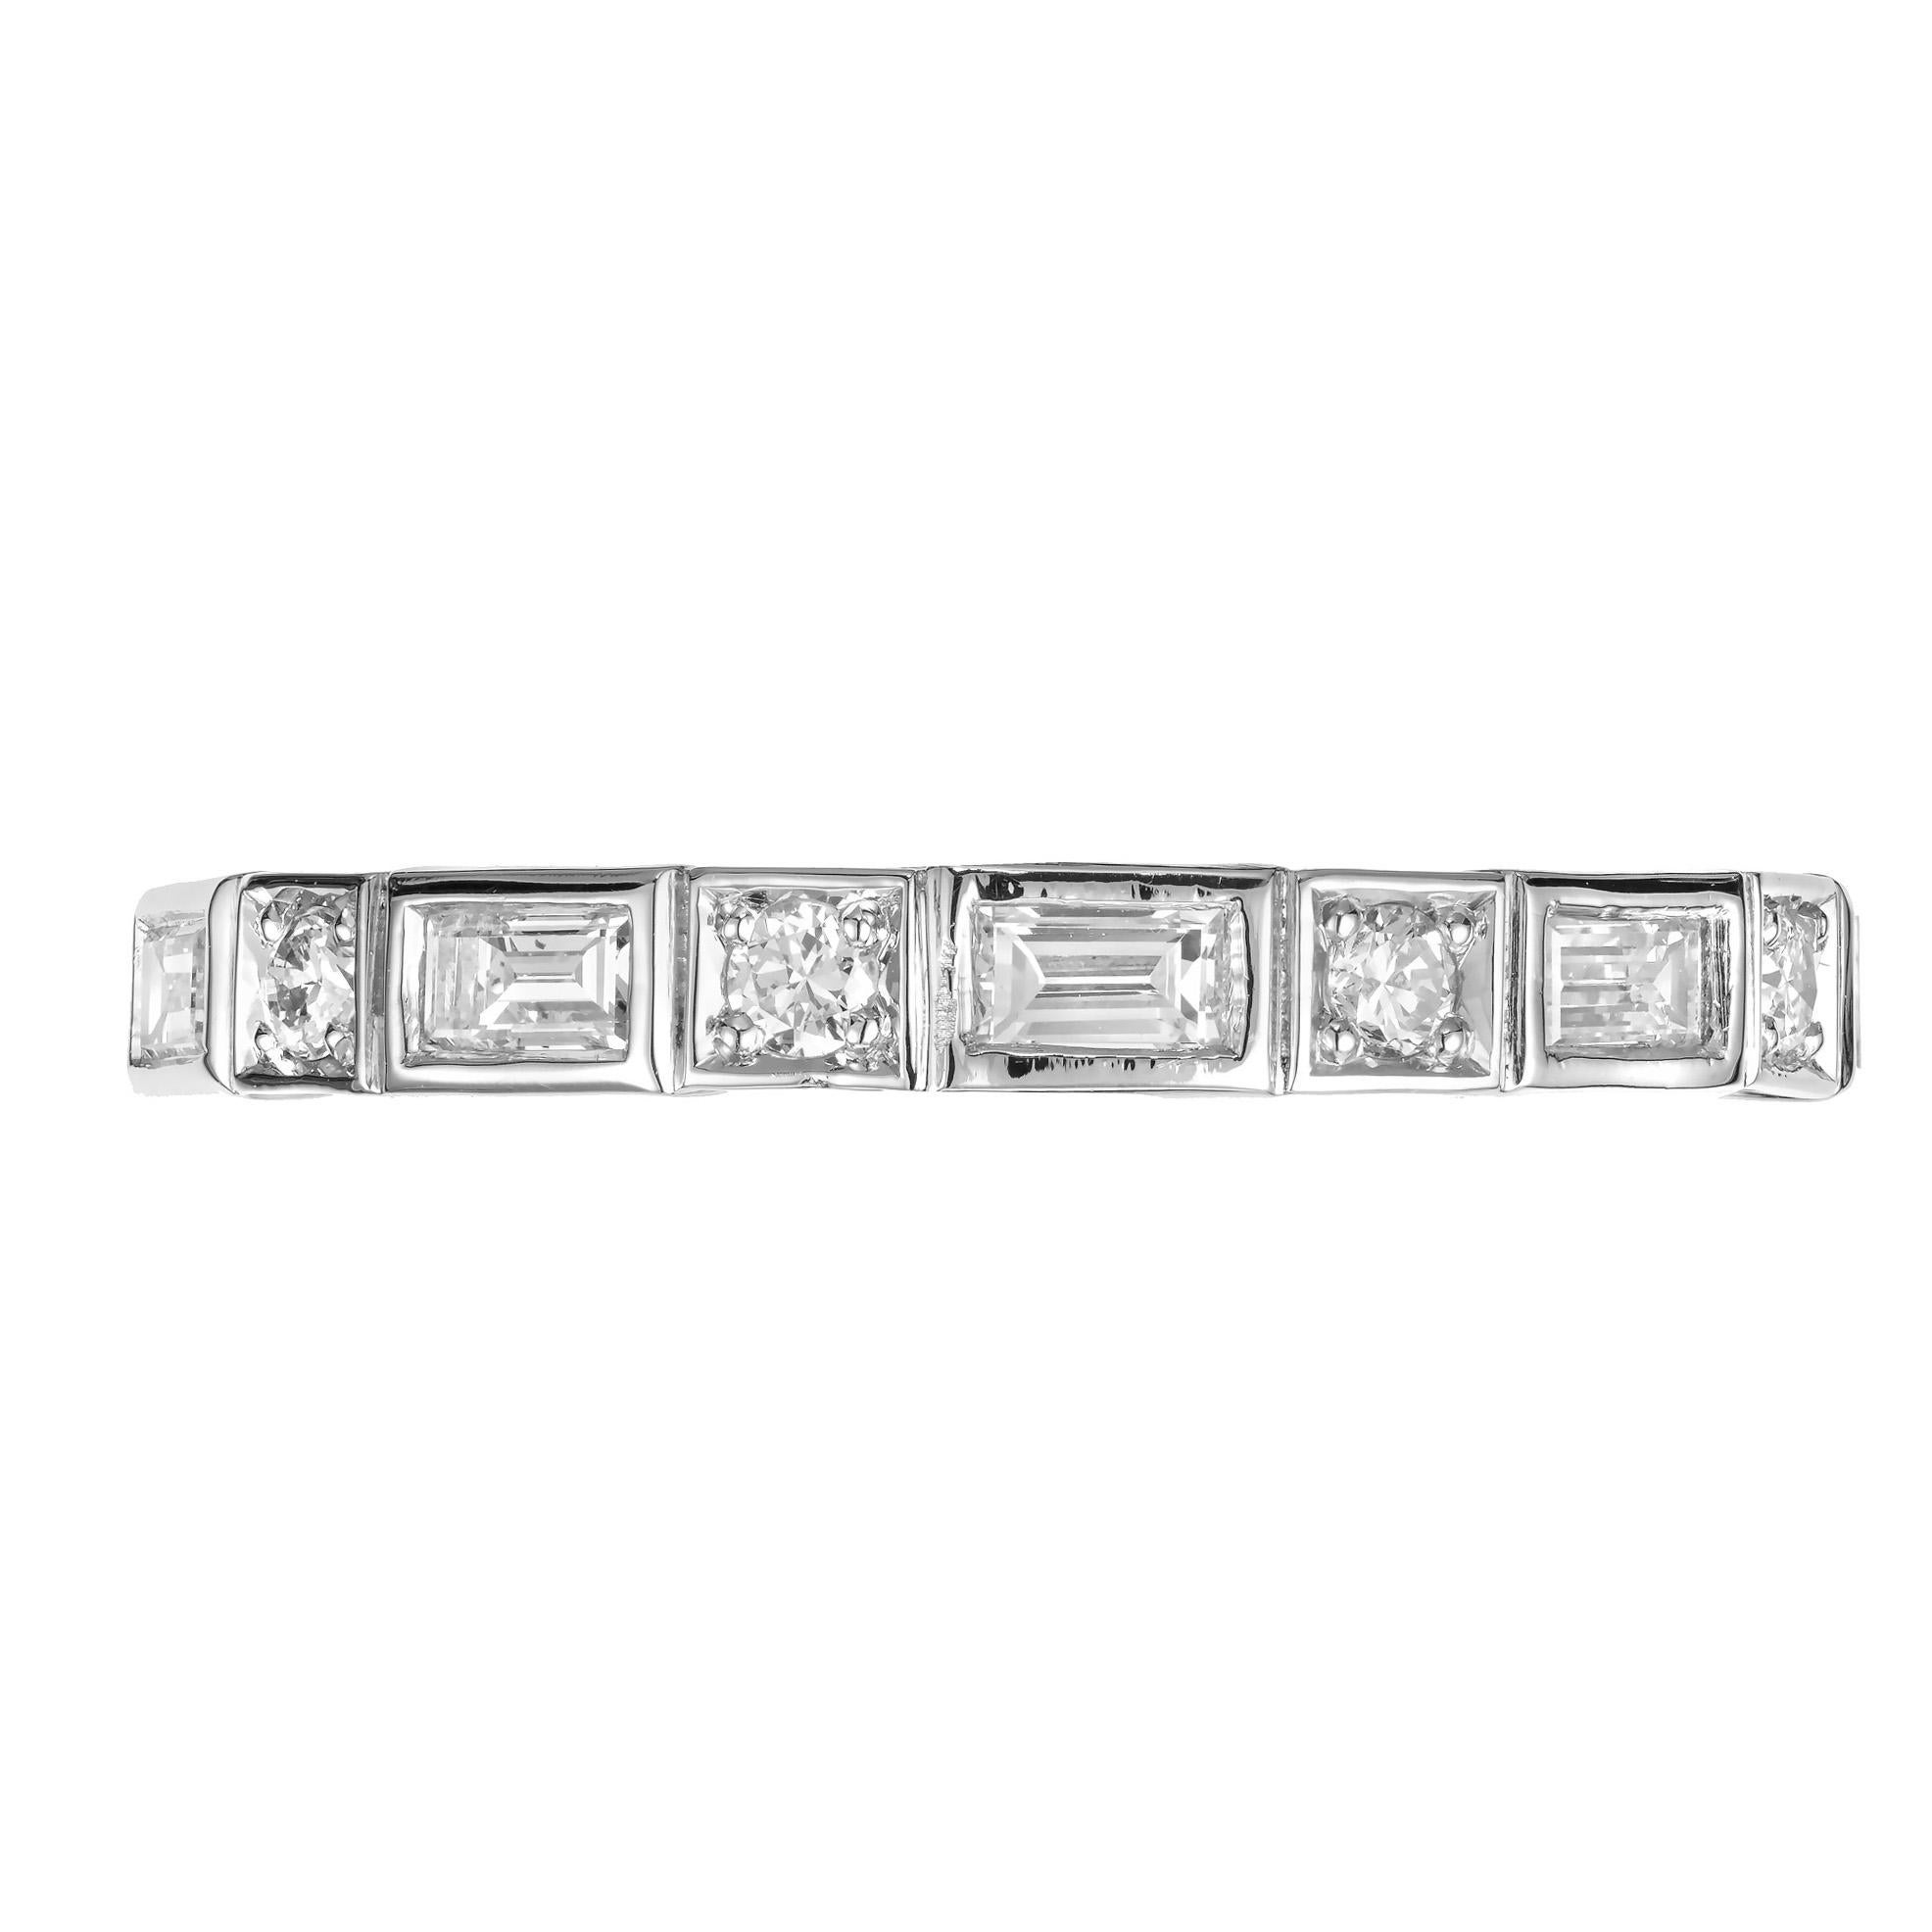 Art Deco inspired baguette and round diamond half way around platinum wedding band ring. Designed and crafted in the Peter Suchy workshop

4 round full cut diamonds, G H SI approx. .10cts
5 straight cut baguette diamonds, G-H VS approx. .33cts
Size